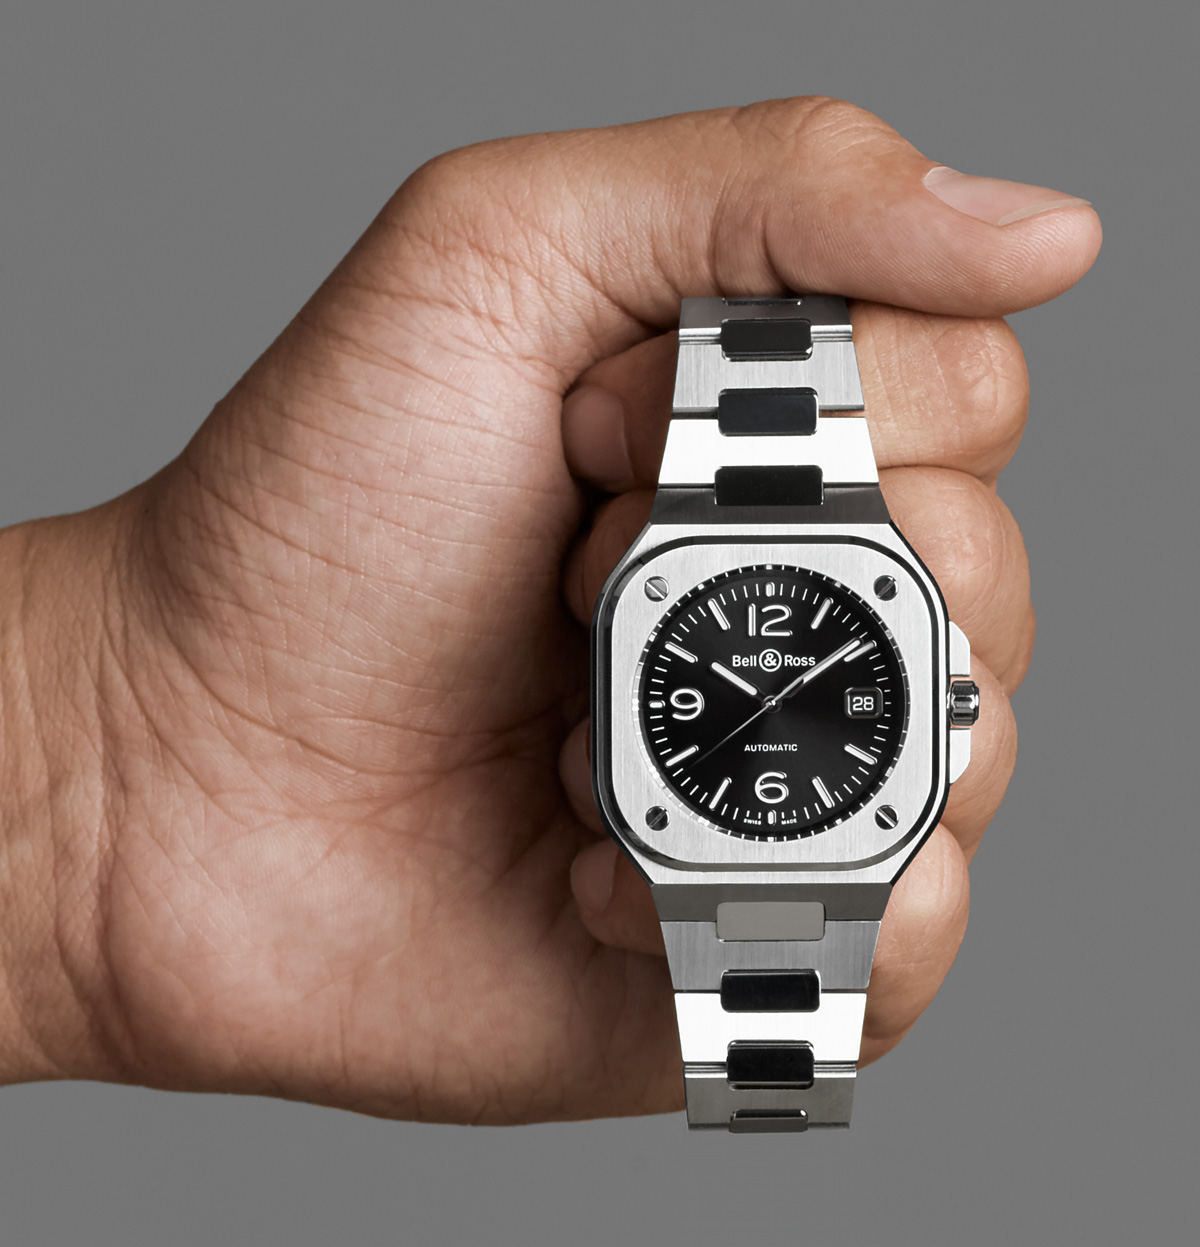 Introducing The Bell & Ross BR 05 Watch Collection Watch Releases 